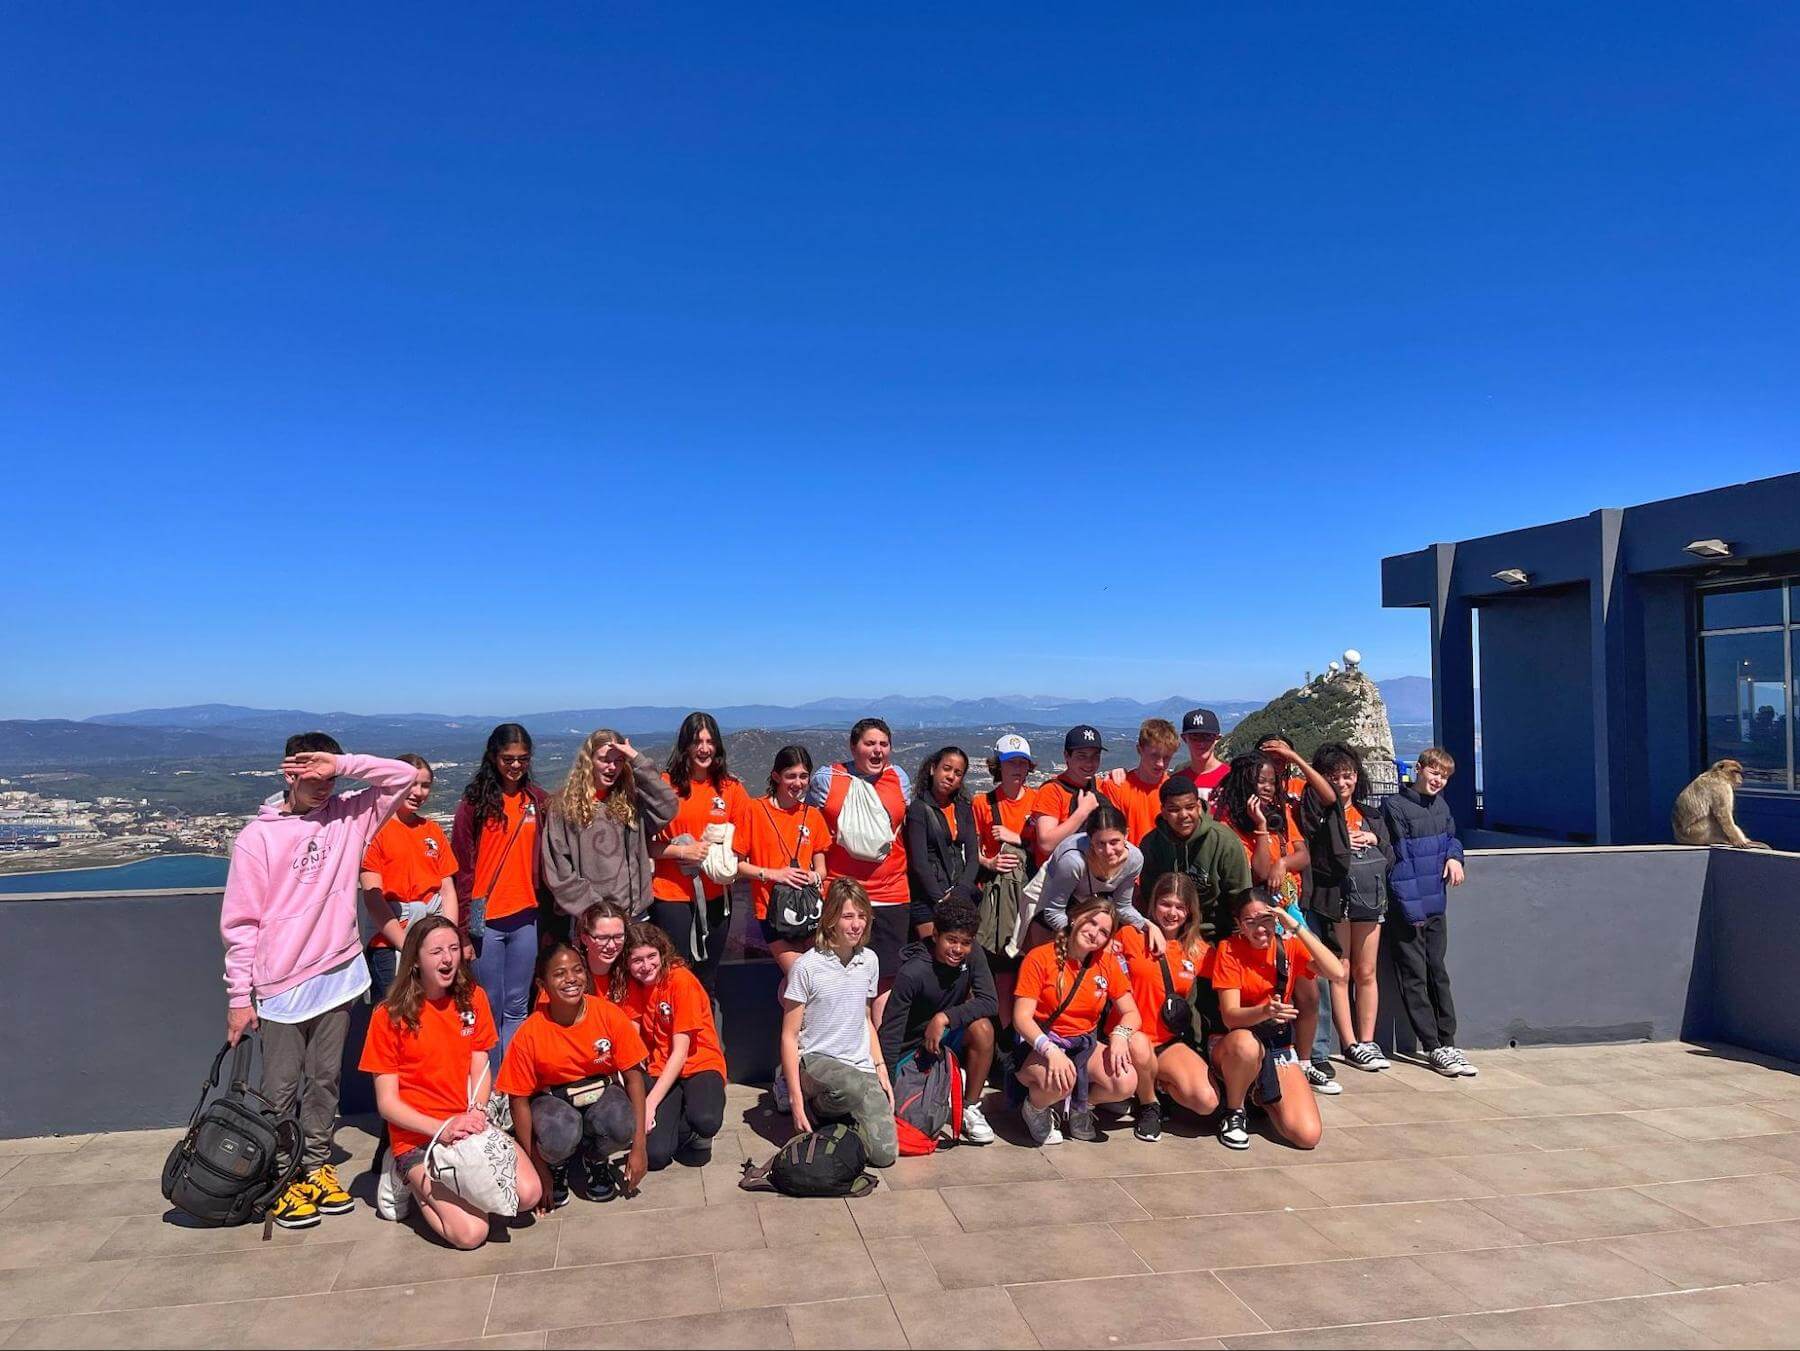 A group of Ethical Culture Fieldston Middle School students pose in Spain